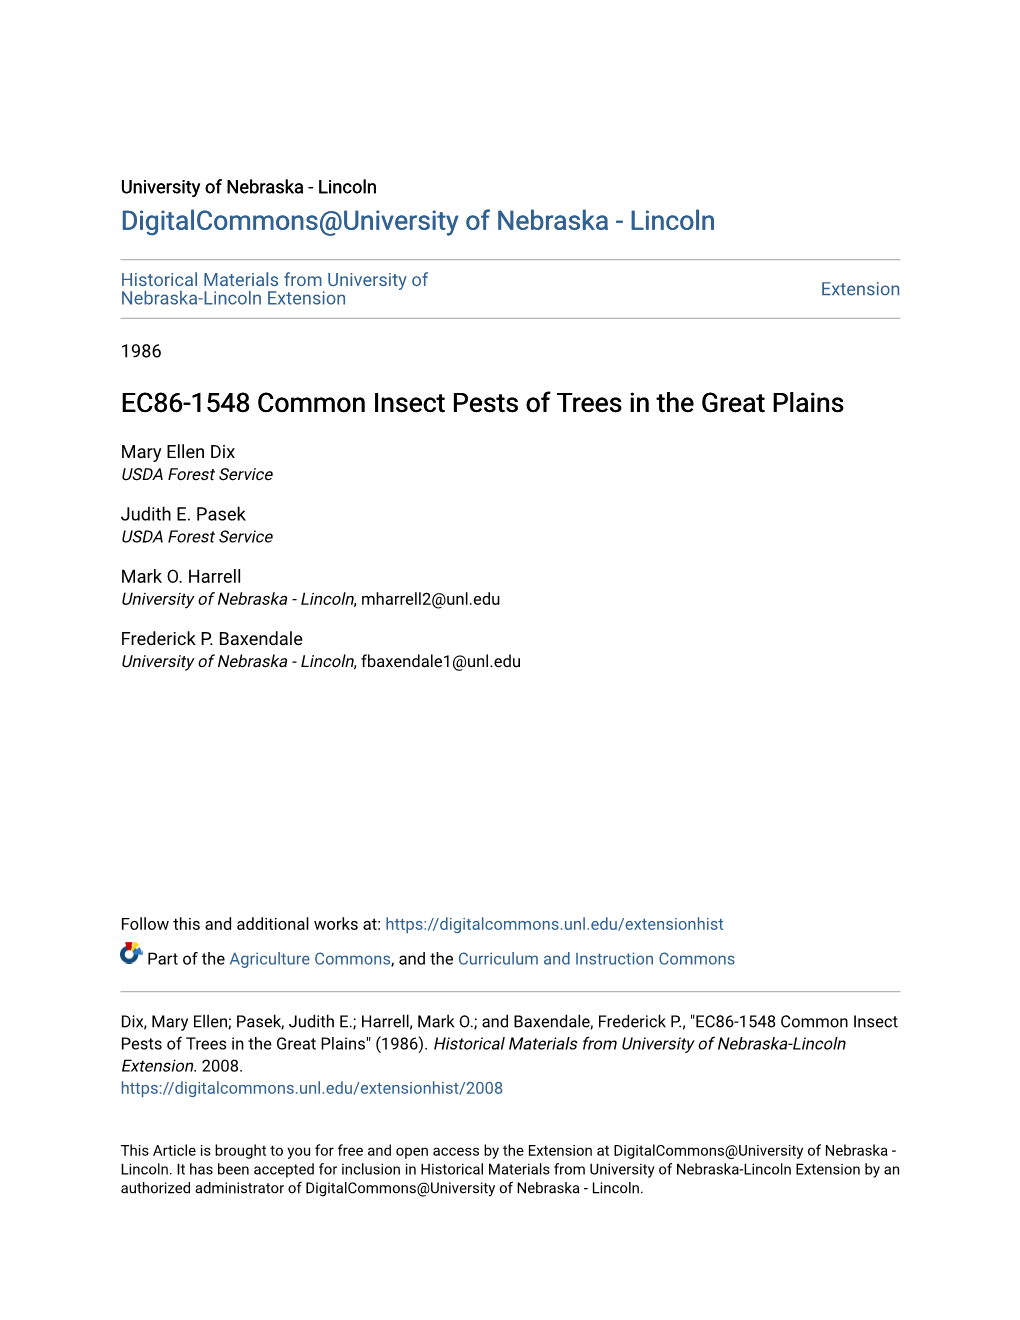 EC86-1548 Common Insect Pests of Trees in the Great Plains